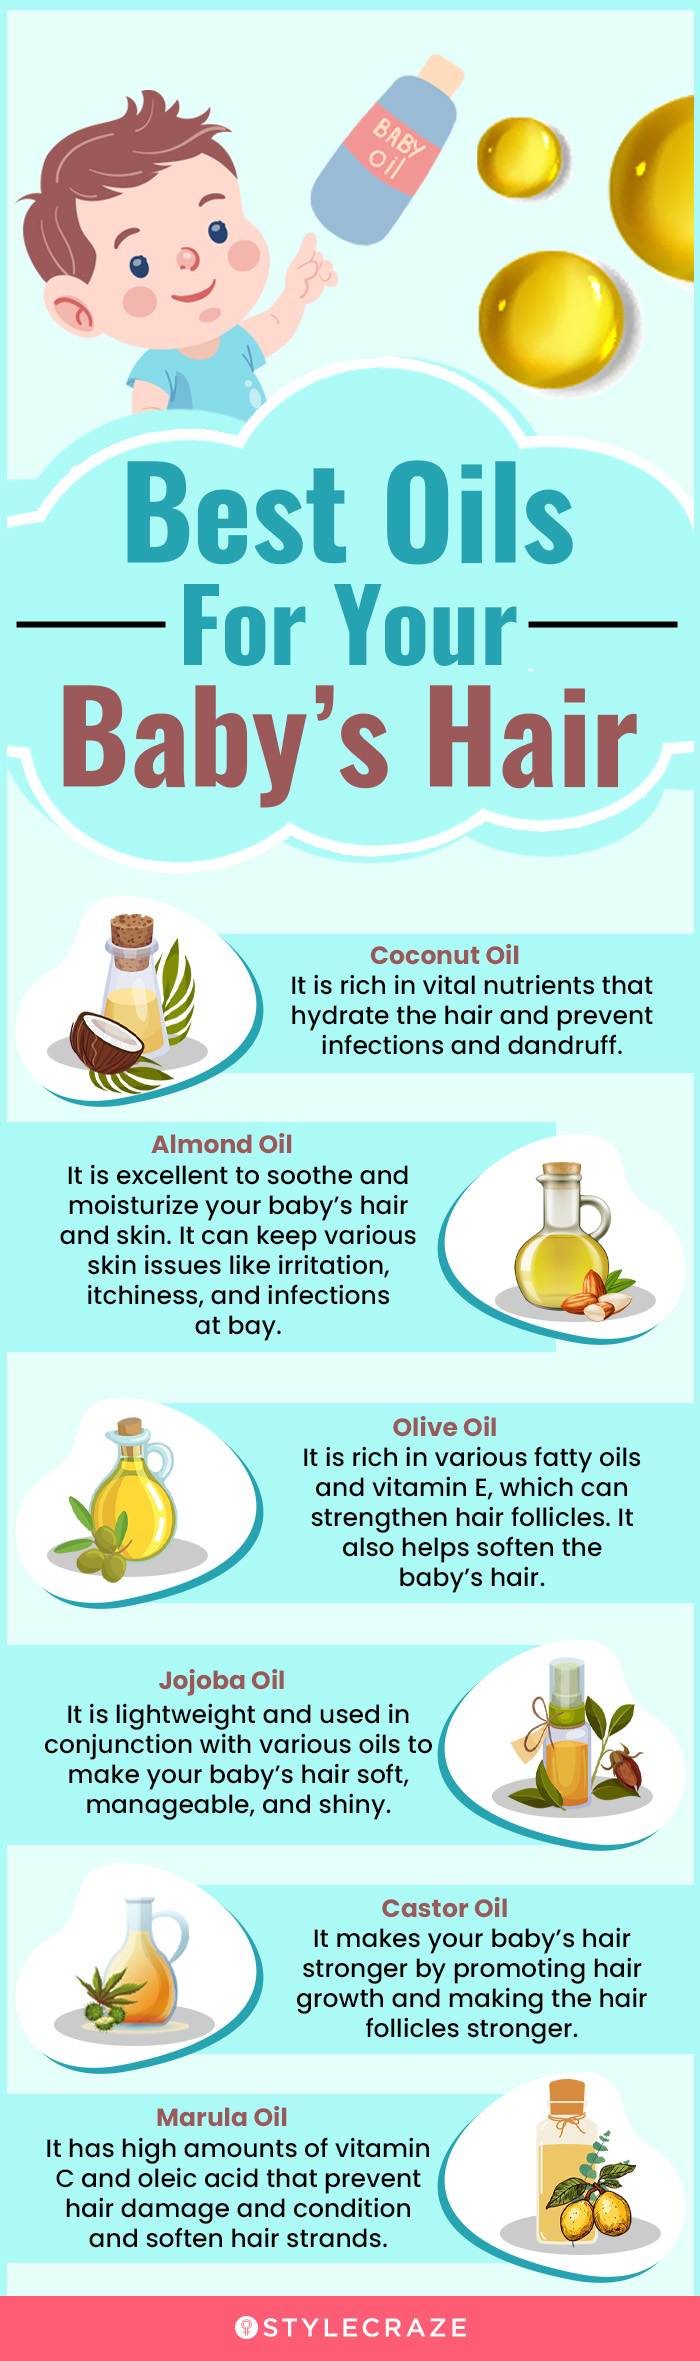 Best Oils For Your Baby’s Hair (infographic)